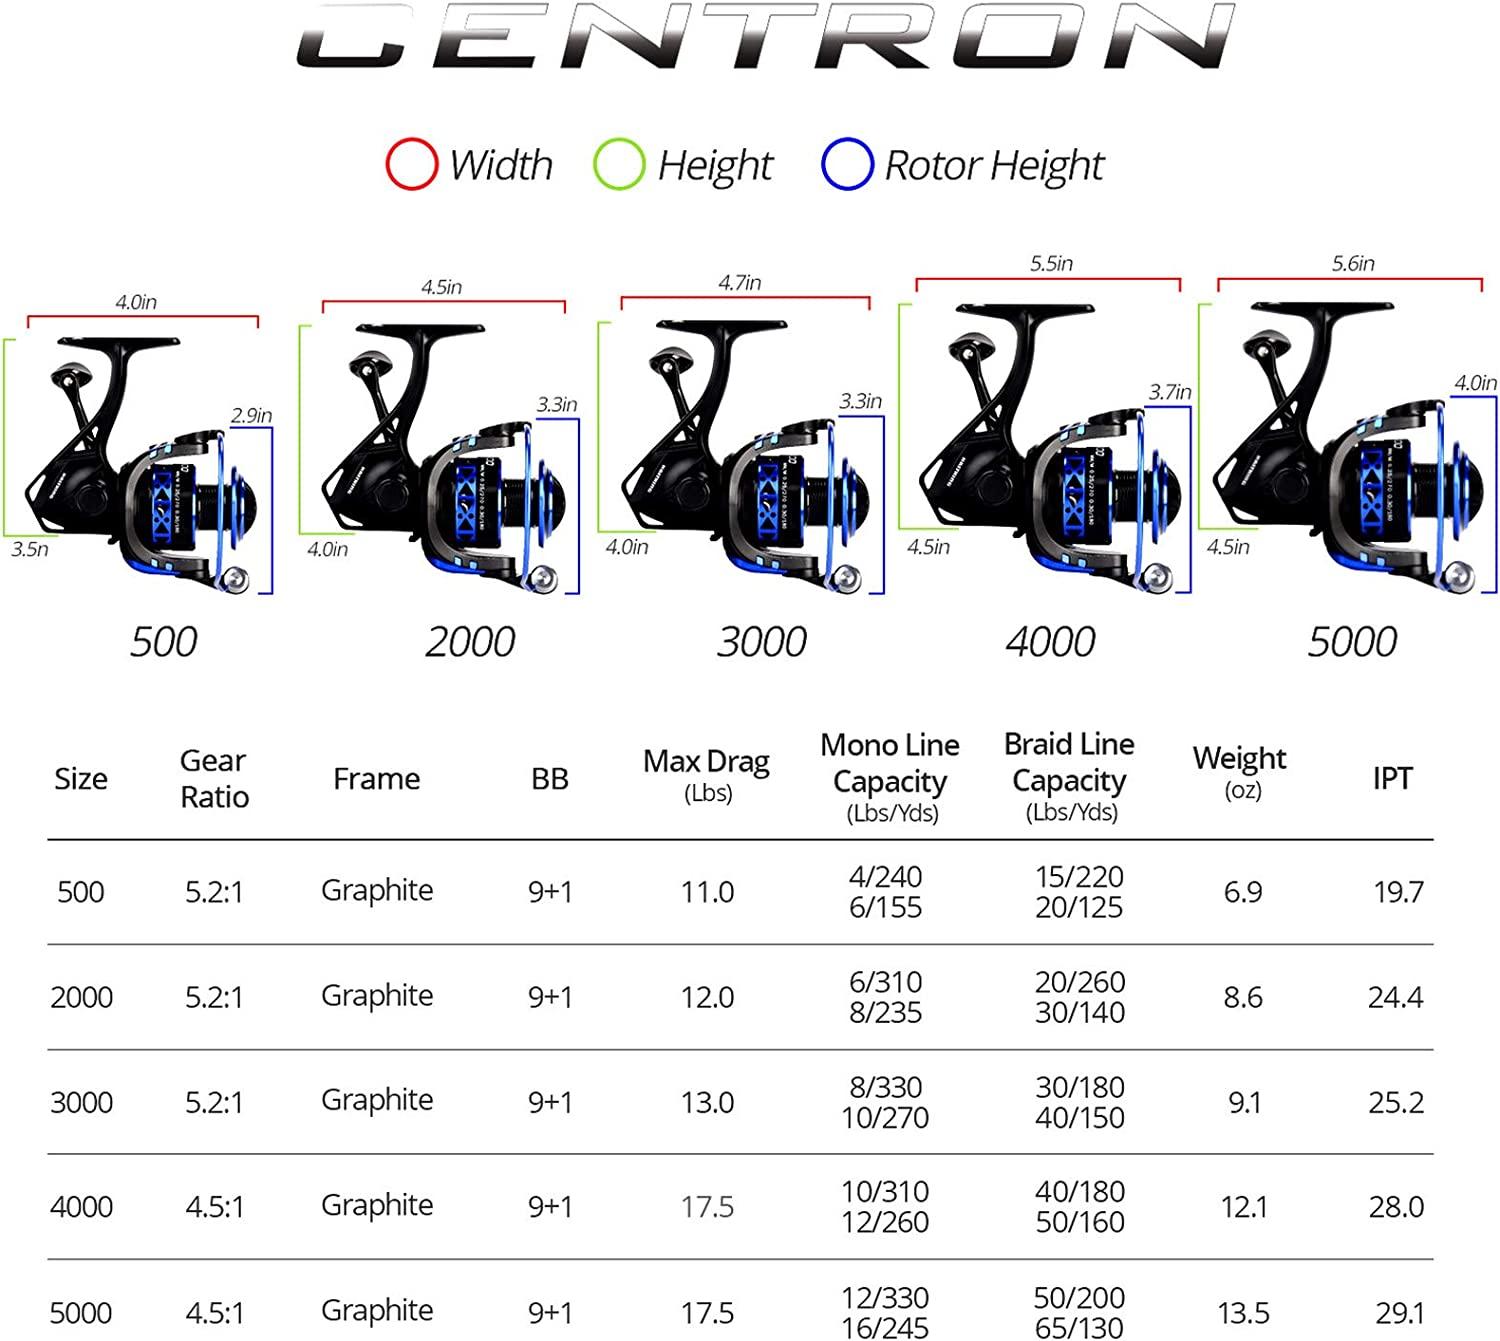 KastKing Centron & Summer One Way Clutch System Low Profile Spinning Reel  9+1 Ball